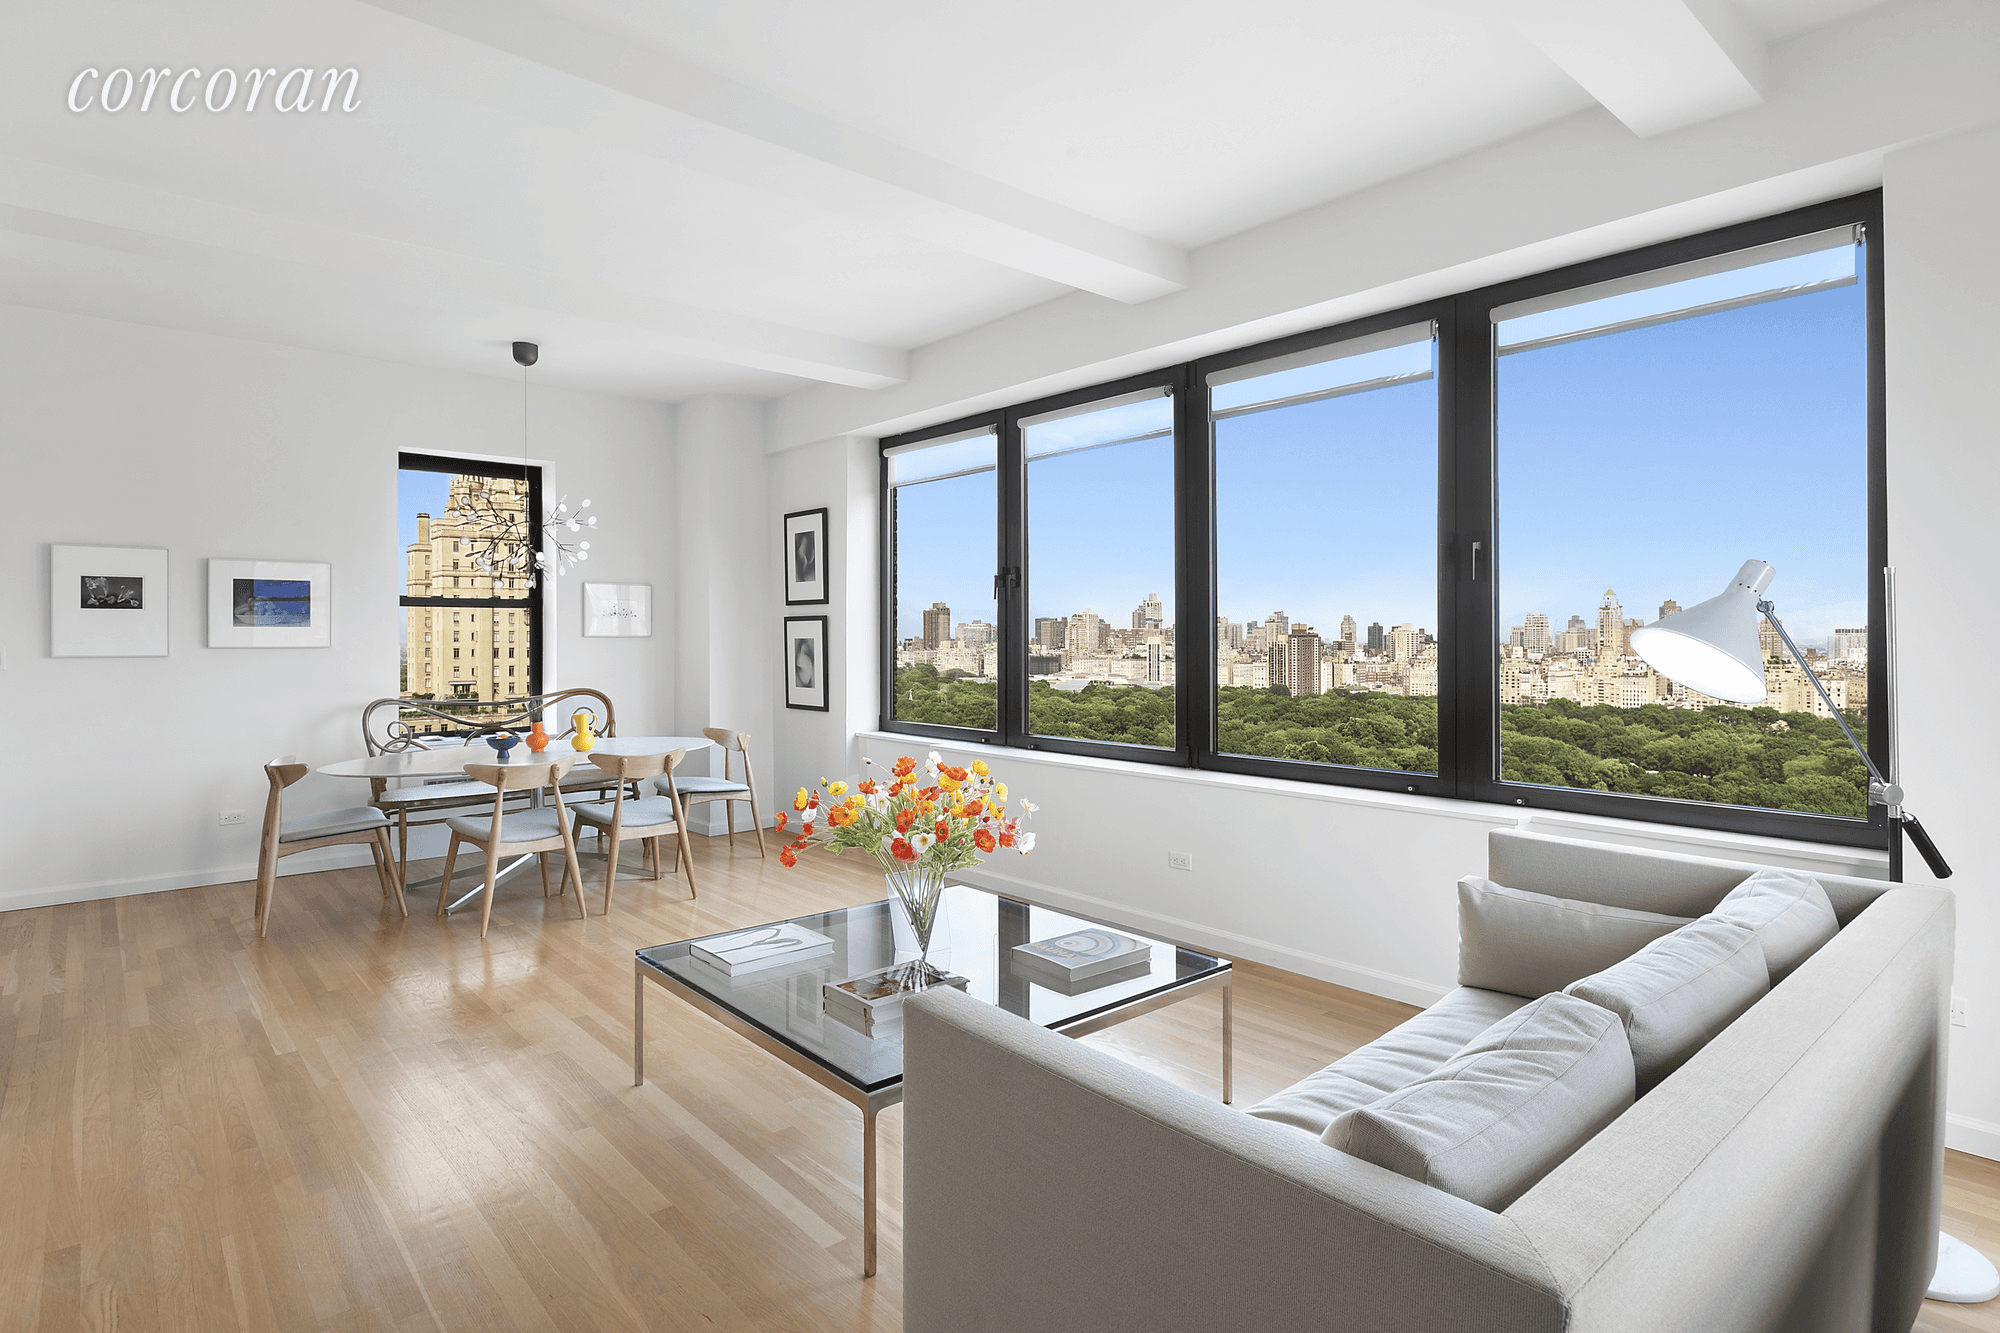 NEW PRICE ! The Oliver Cromwell, 12 West 72 Street One of a kind fully renovated one bedroom home with glorious light and billion dollar views of Central Park and ...